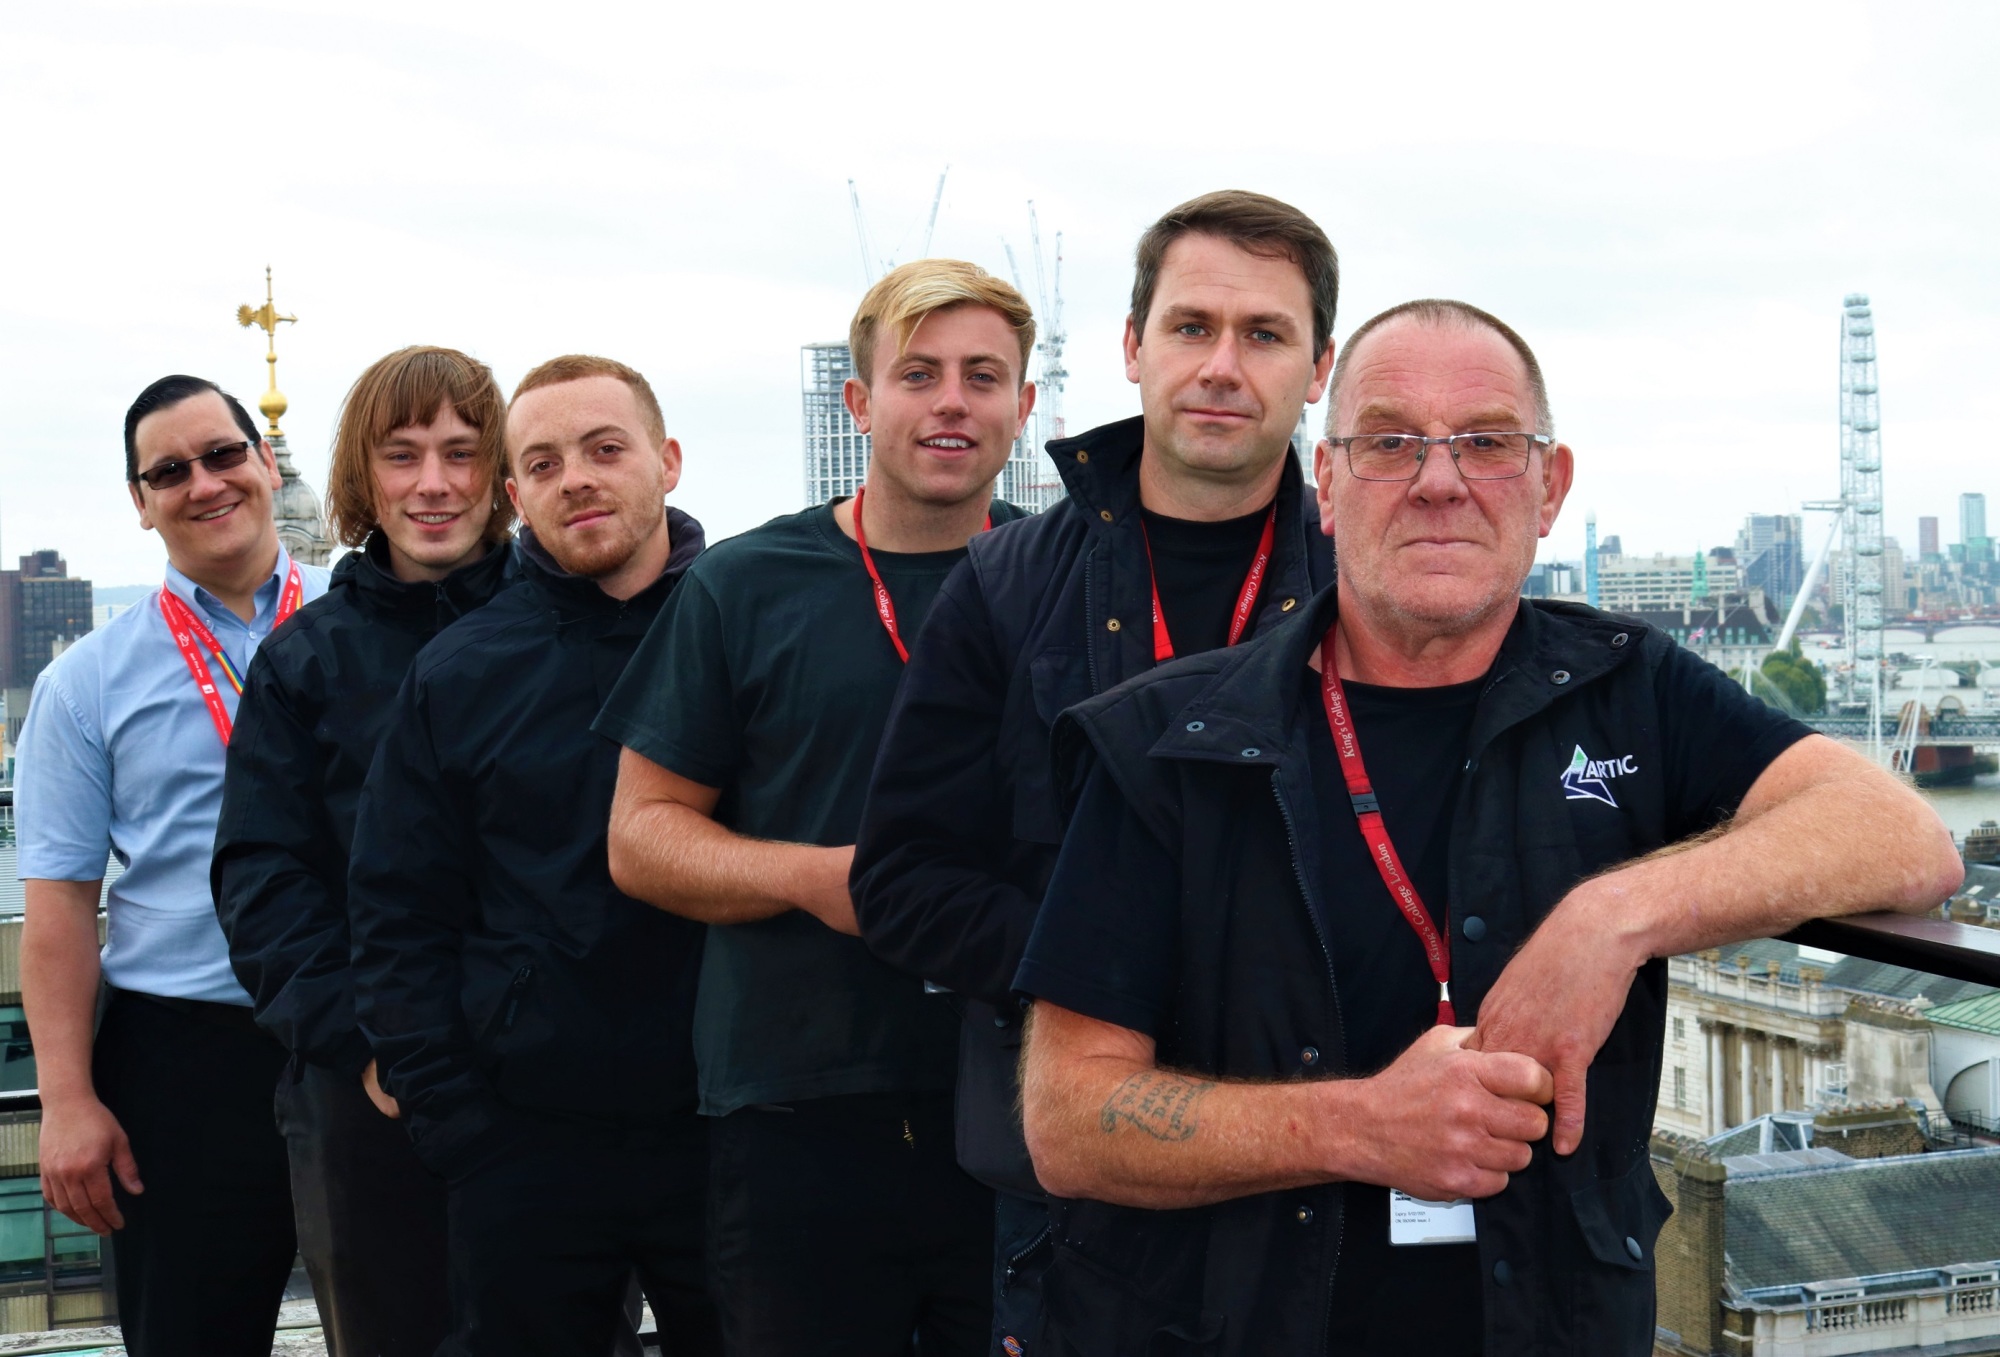 Artic's technical and supervisory team